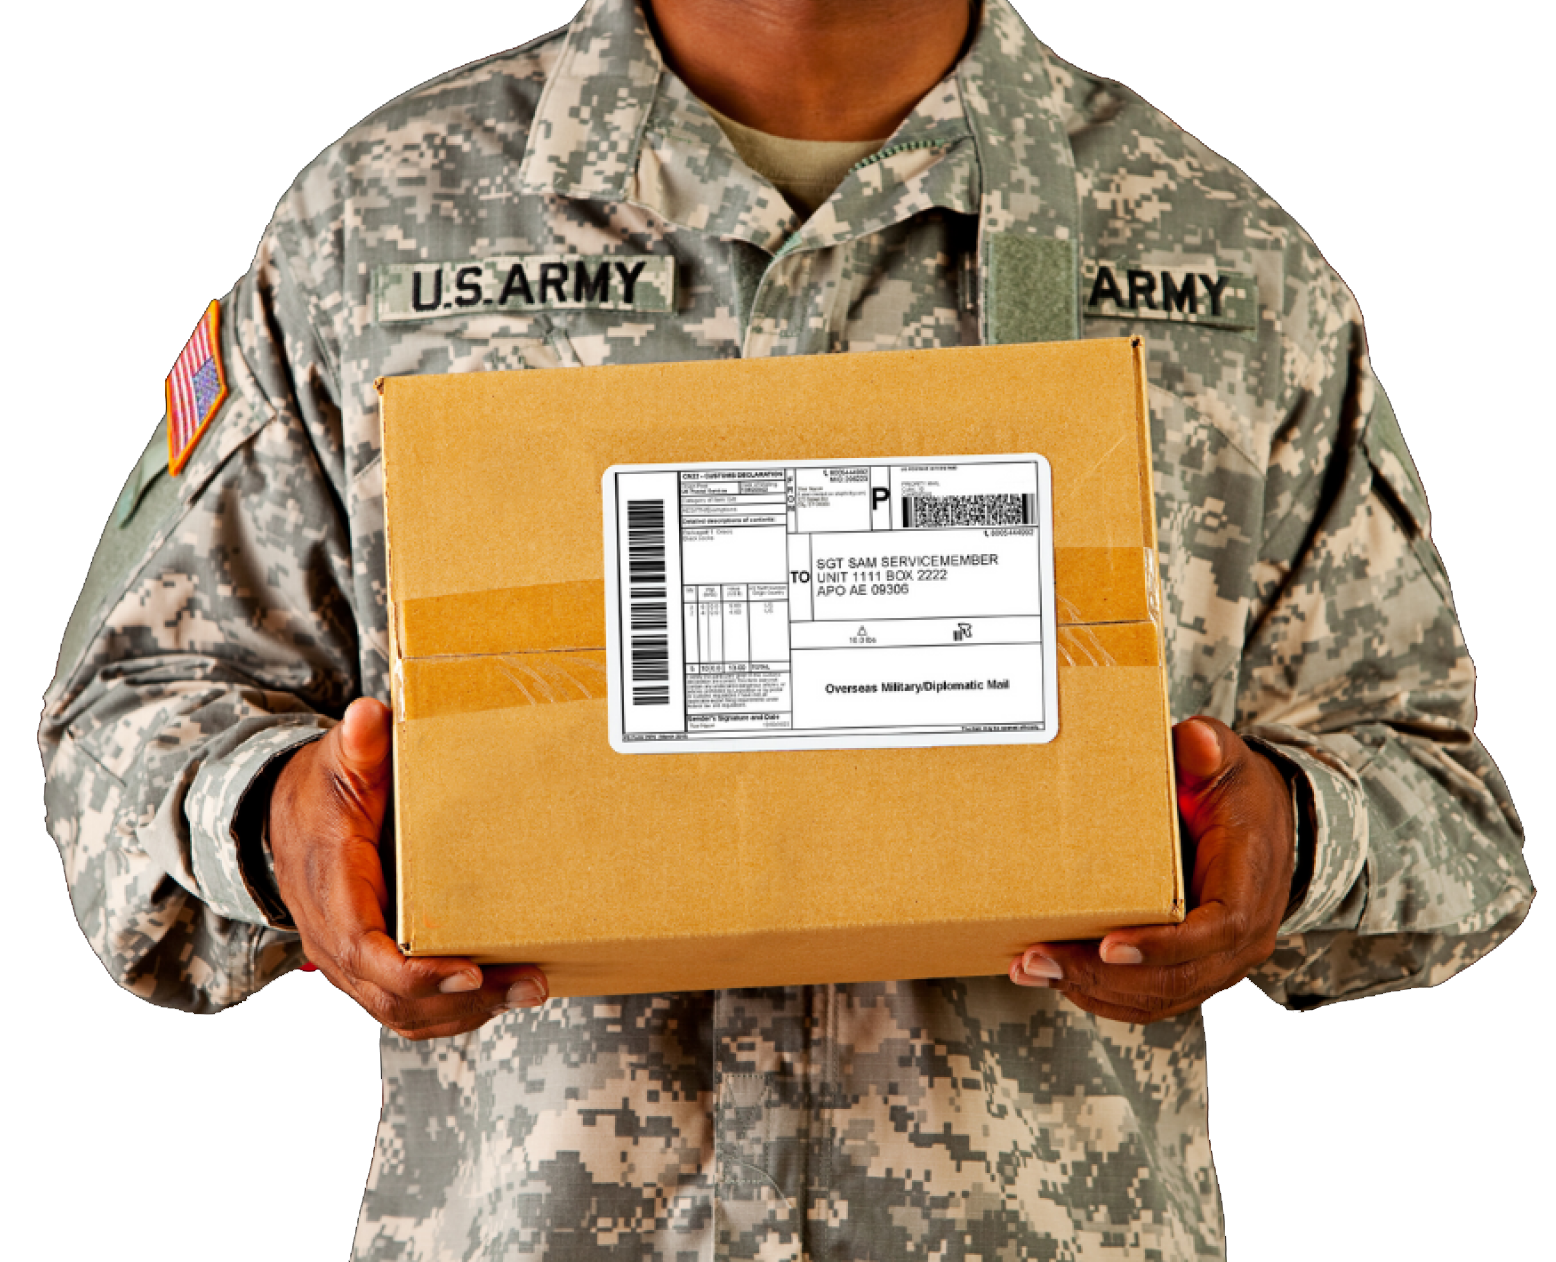 An Army officer holding a care package they received